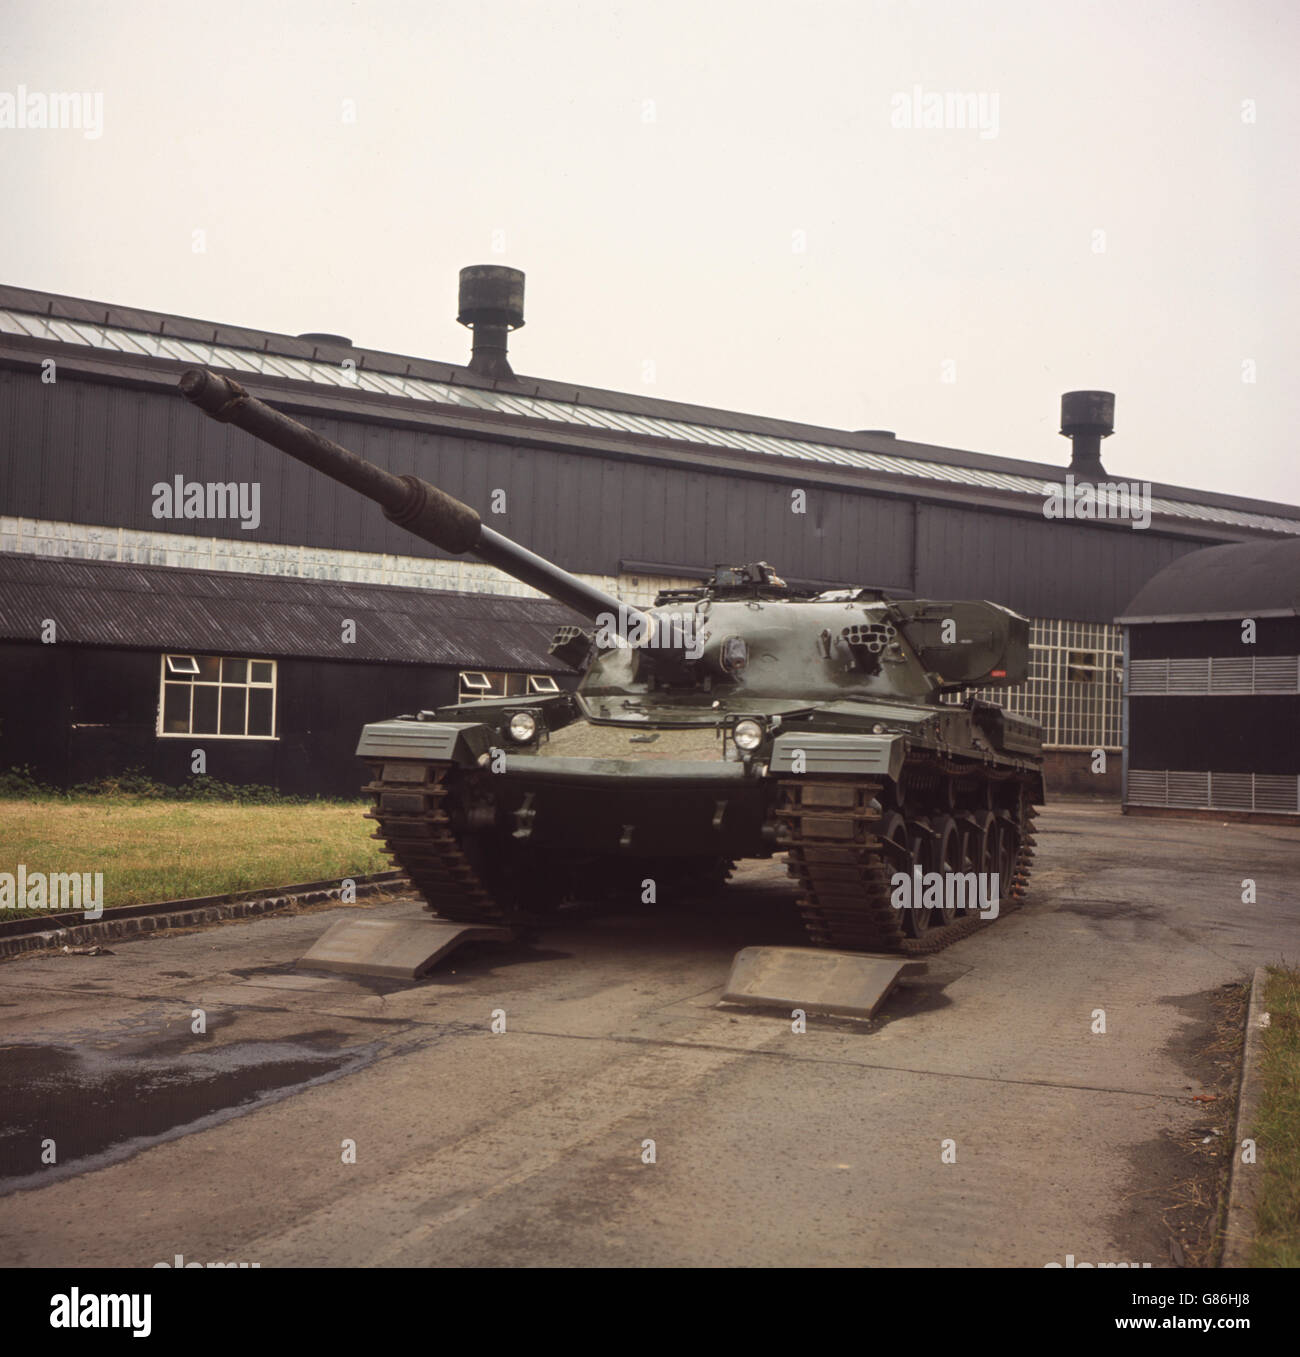 Chieftain, the British Army's latest tank, which weighs 50 tons and has a 120mm gun as it's main armament. Stock Photo